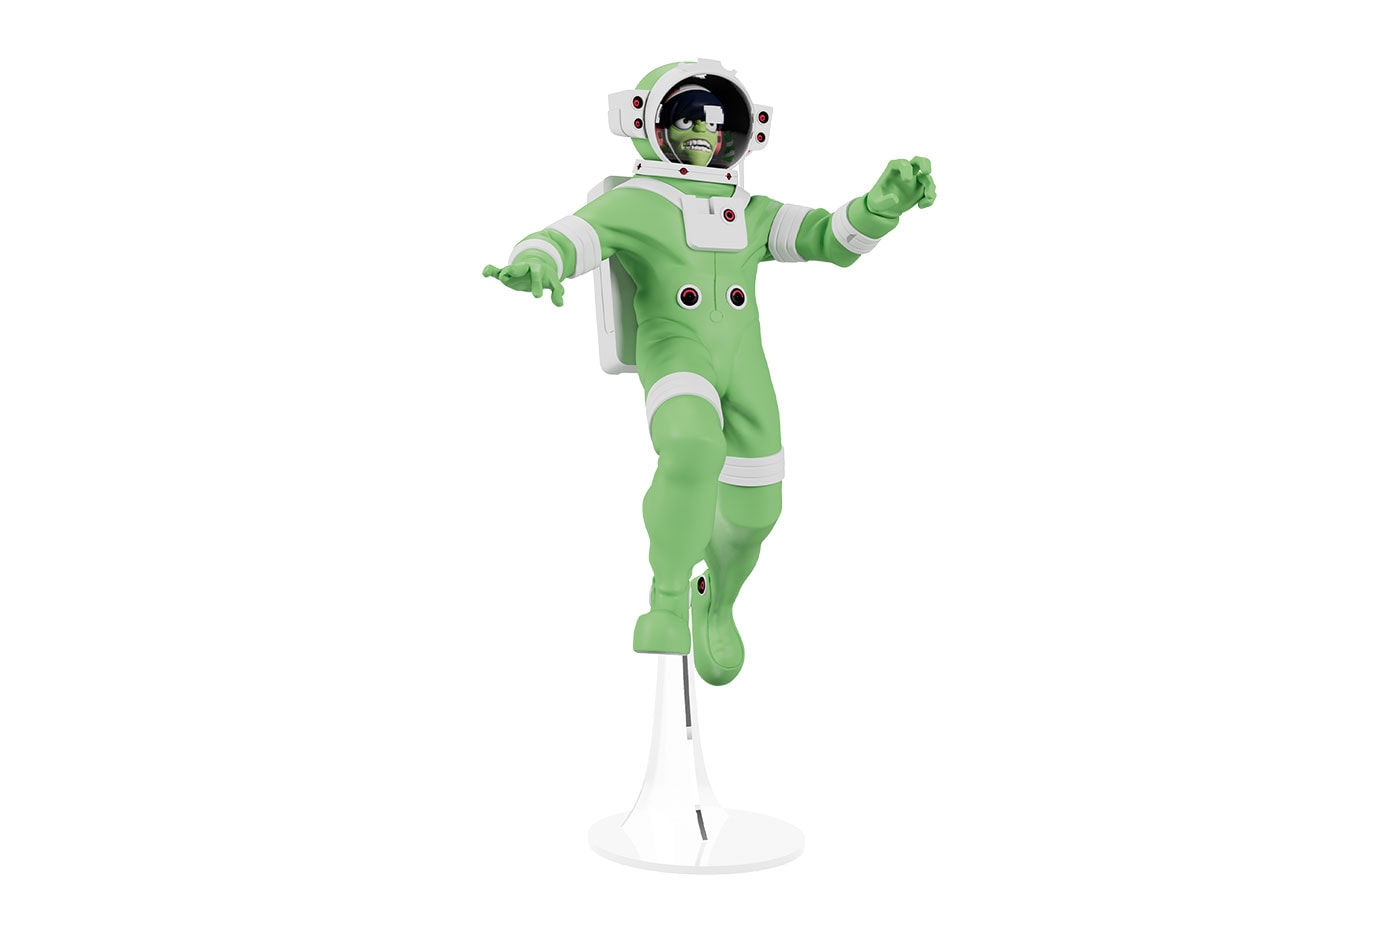 Gorillaz and Superplastic Announce Two Limited-Edition Toy Drops spacesuit set mini blind toymakers iconic band 12 inch vinyl day glow moon landing  murdoc russel noodleneon strange timez LED eyesgraviy 17 usd 110 usd release info